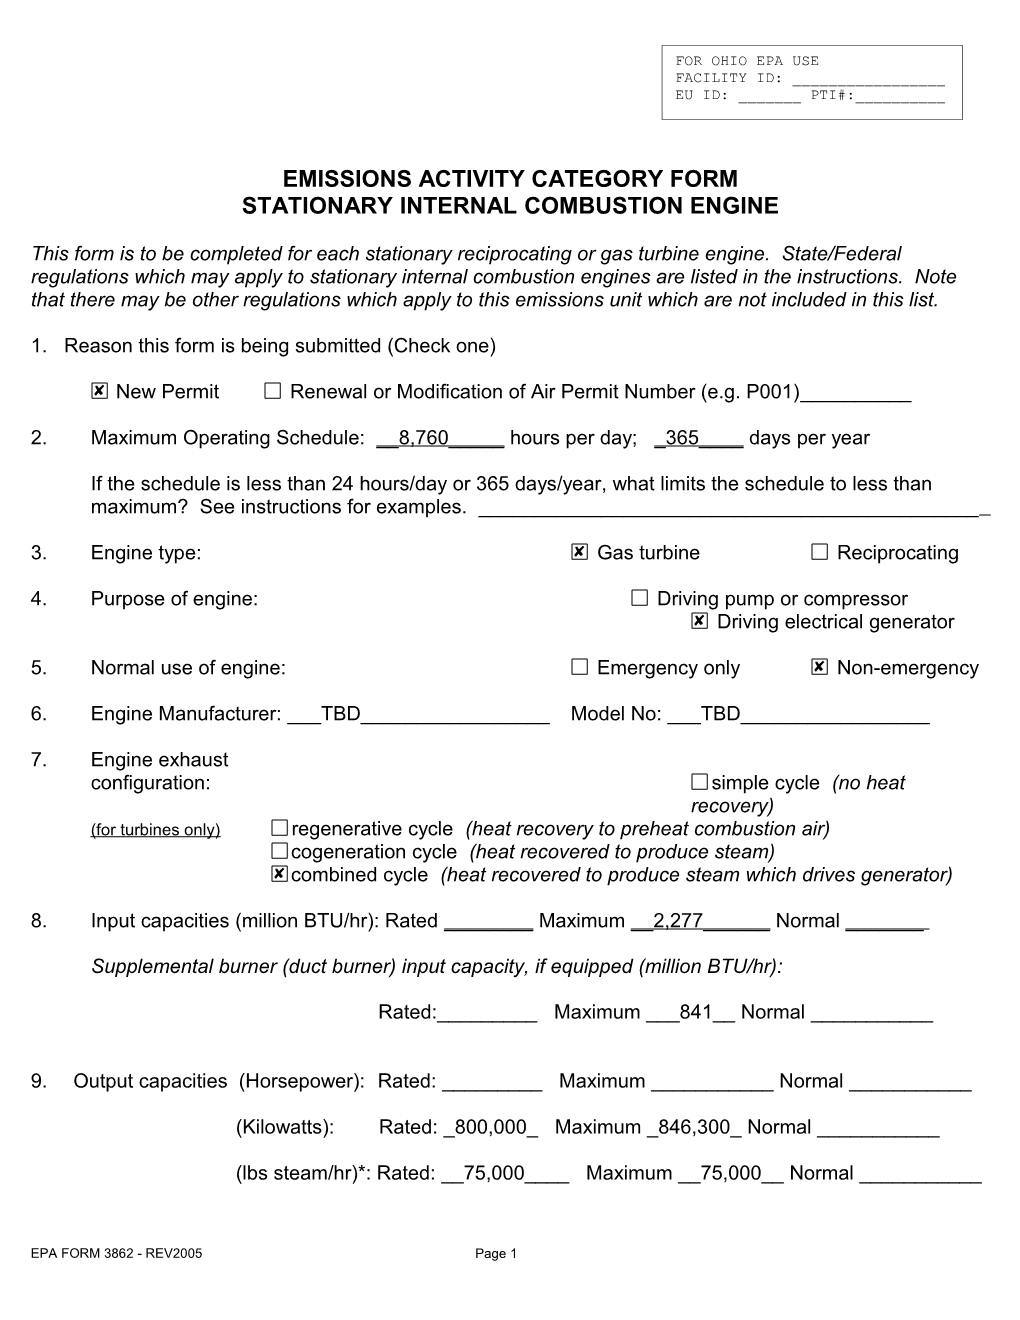 Emissions Activity Category Form s3